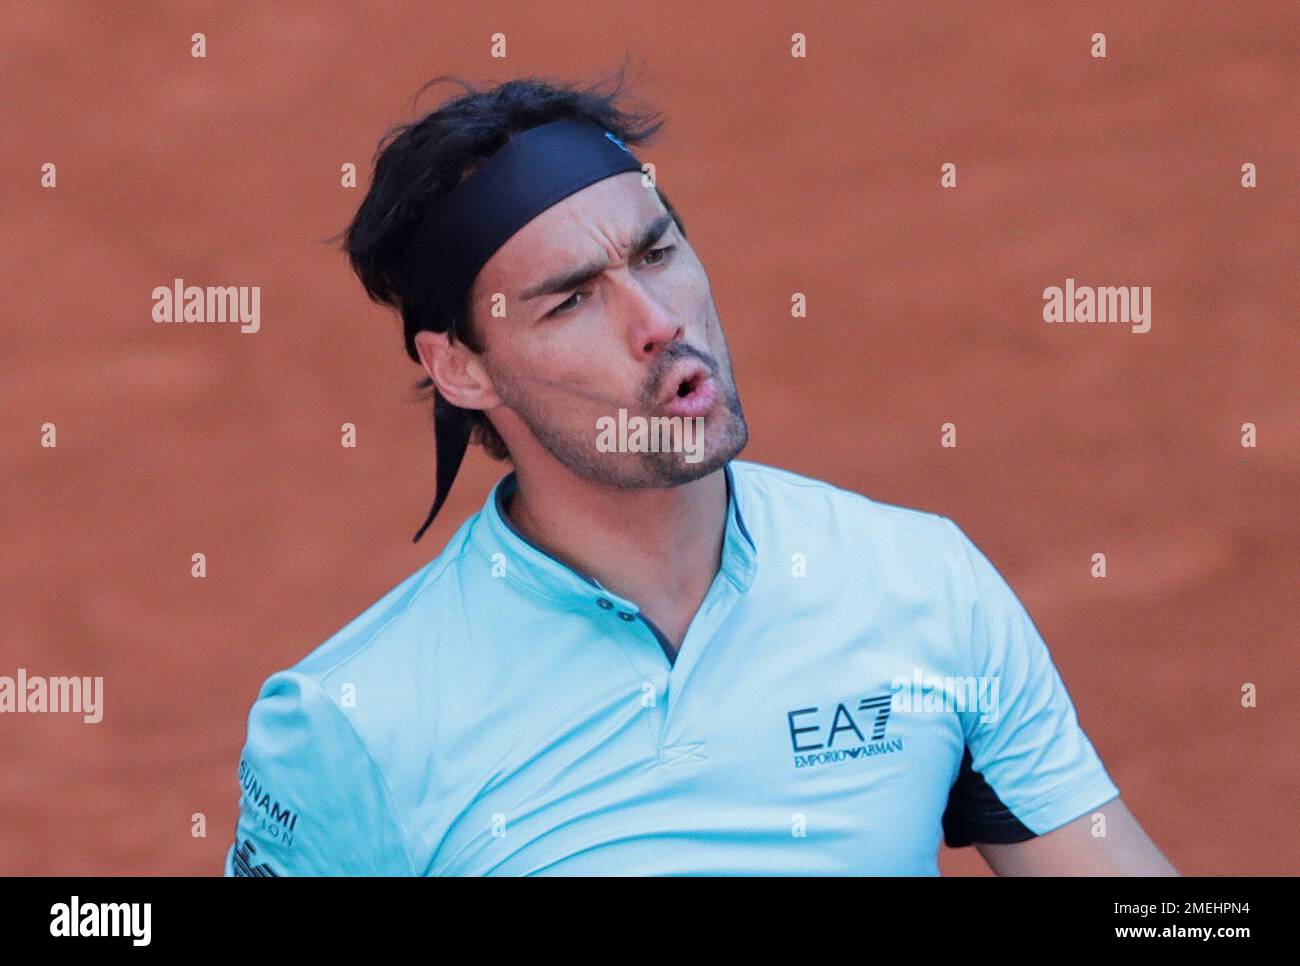 Fabio Fognini of Italy reacts to a fault during his match against Matteo Berrettini of Italy at the Madrid Open tennis tournament in Madrid, Spain, Tuesday, May 4, 2021